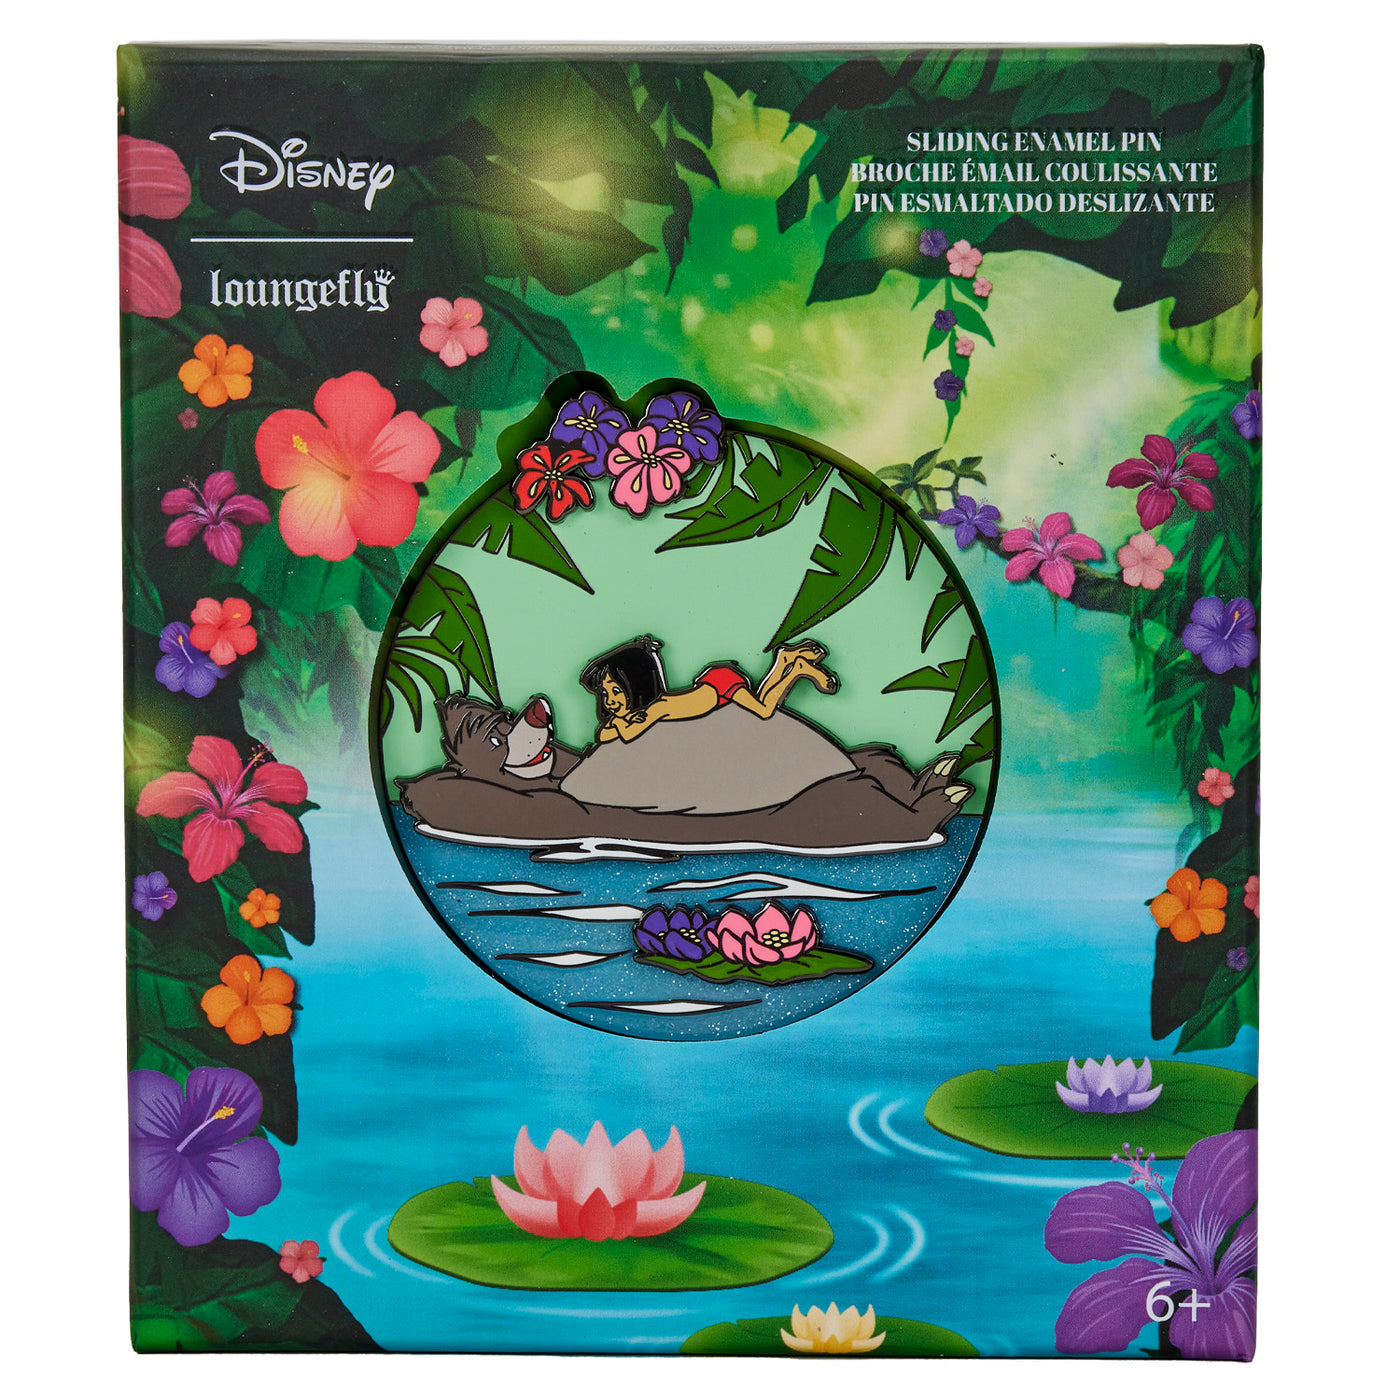 Loungefly Disney Jungle Book Baloo Belly 3" Collector Box Pin